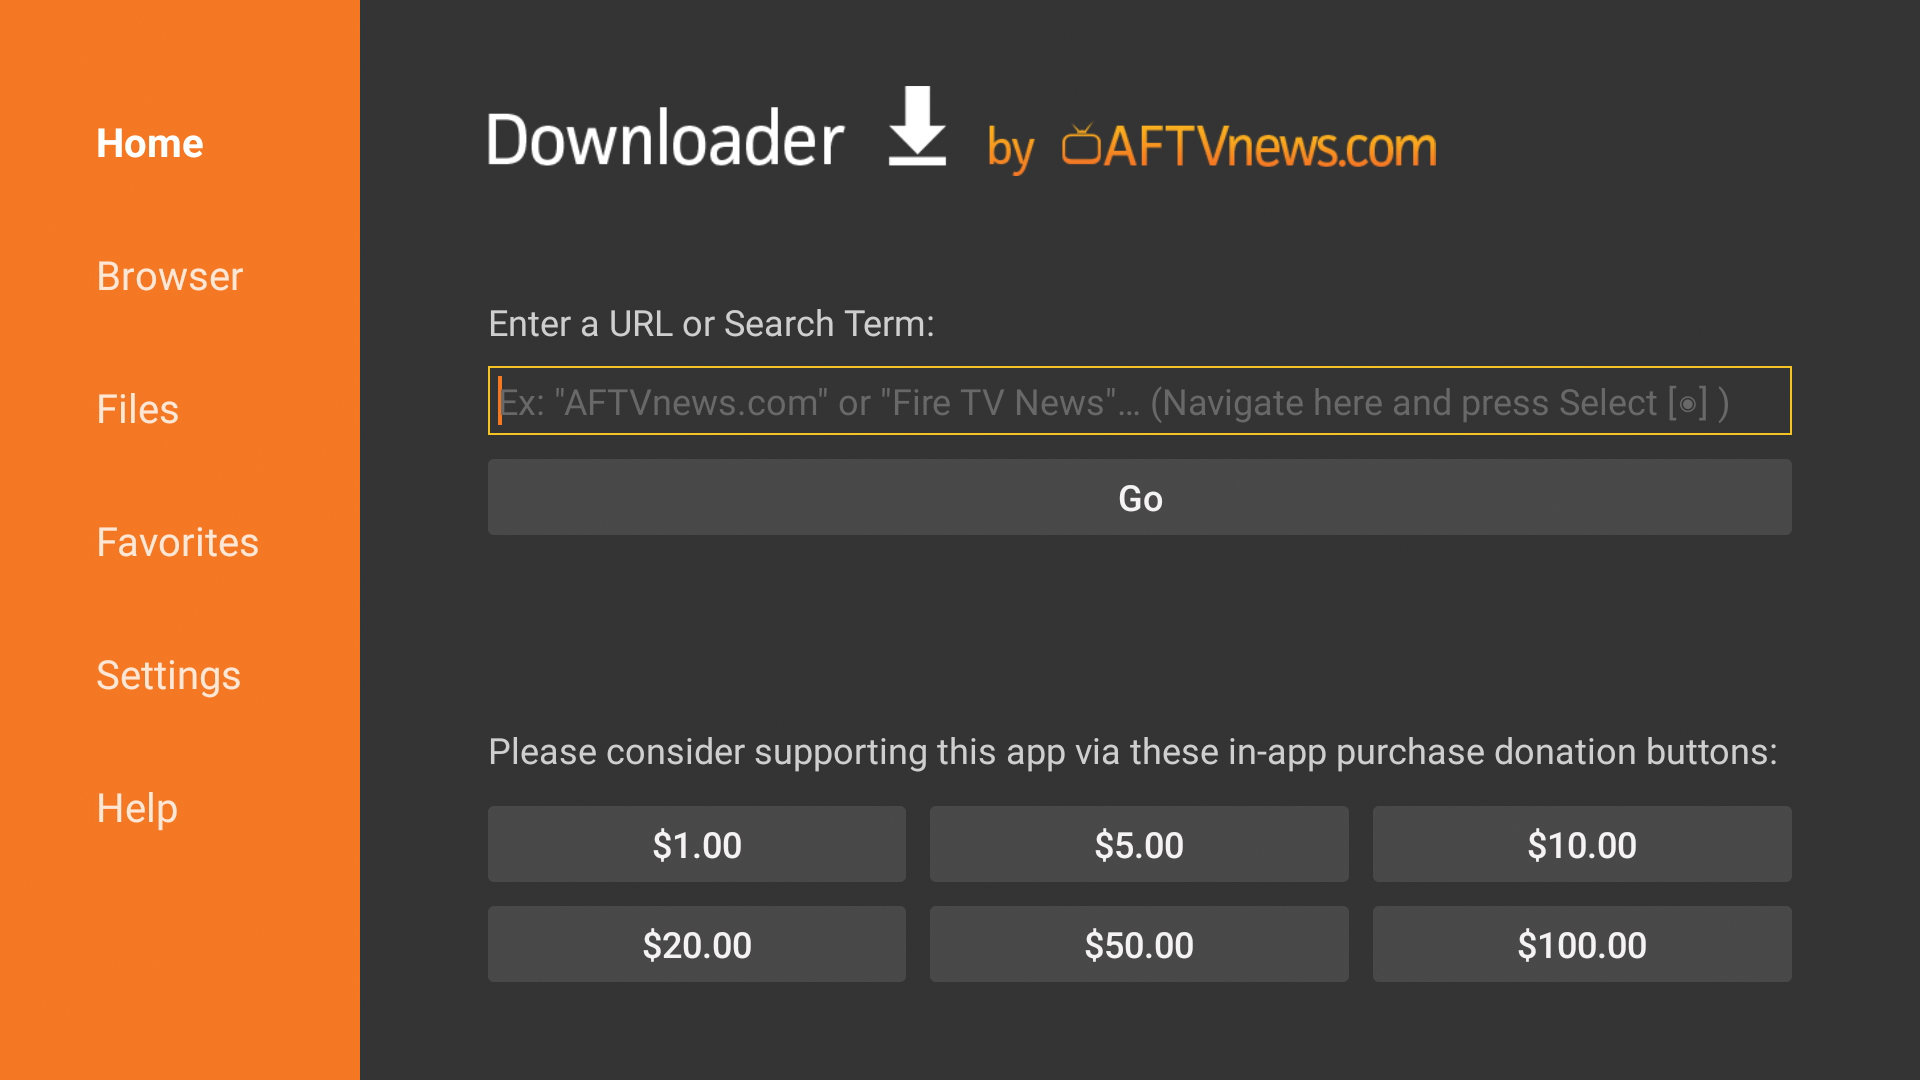 You can now use Downloader on your Android TV or Google TV device.